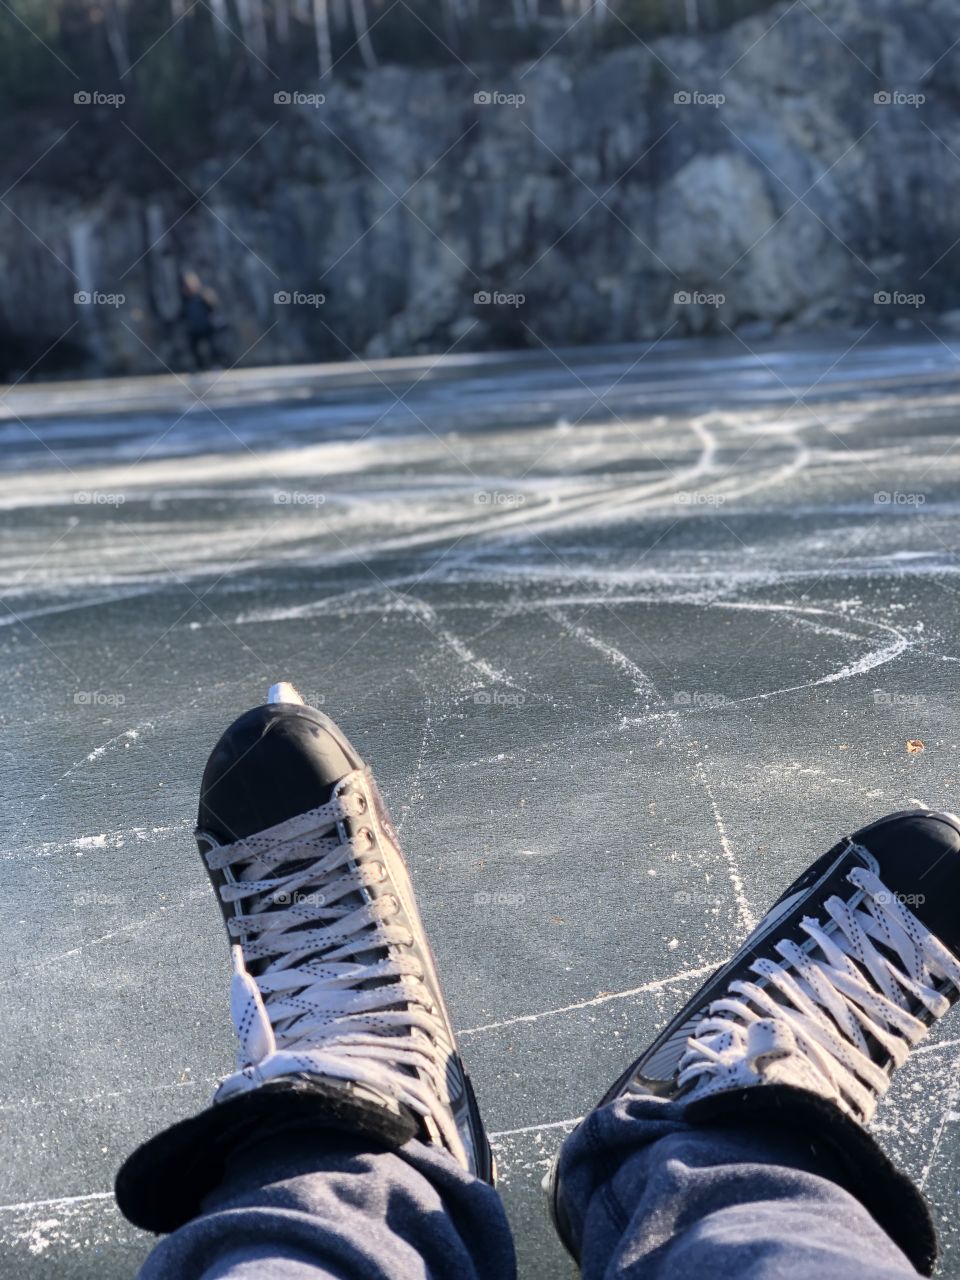 Skating on the frozen pond. Canadian eh